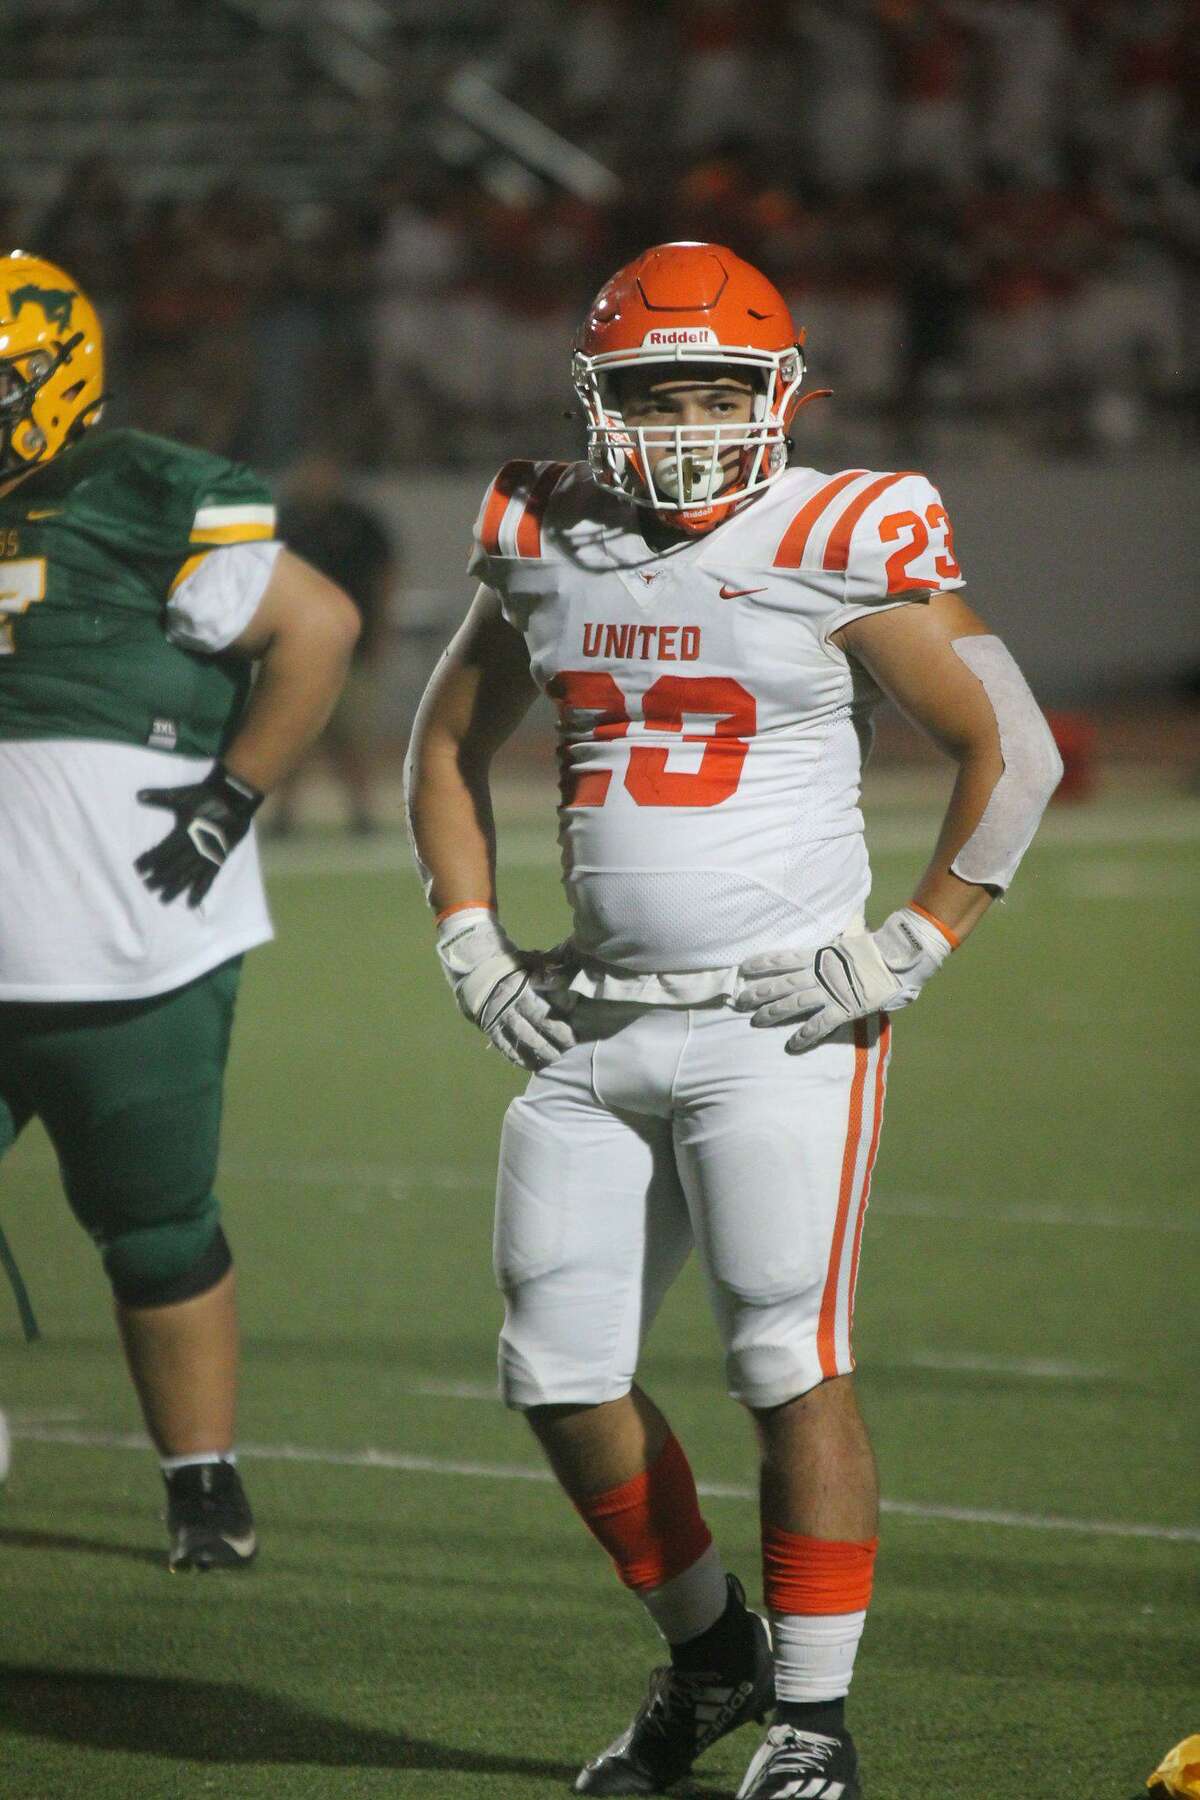 Andy Torres shined in United’s scrimmage against Nixon on Friday.